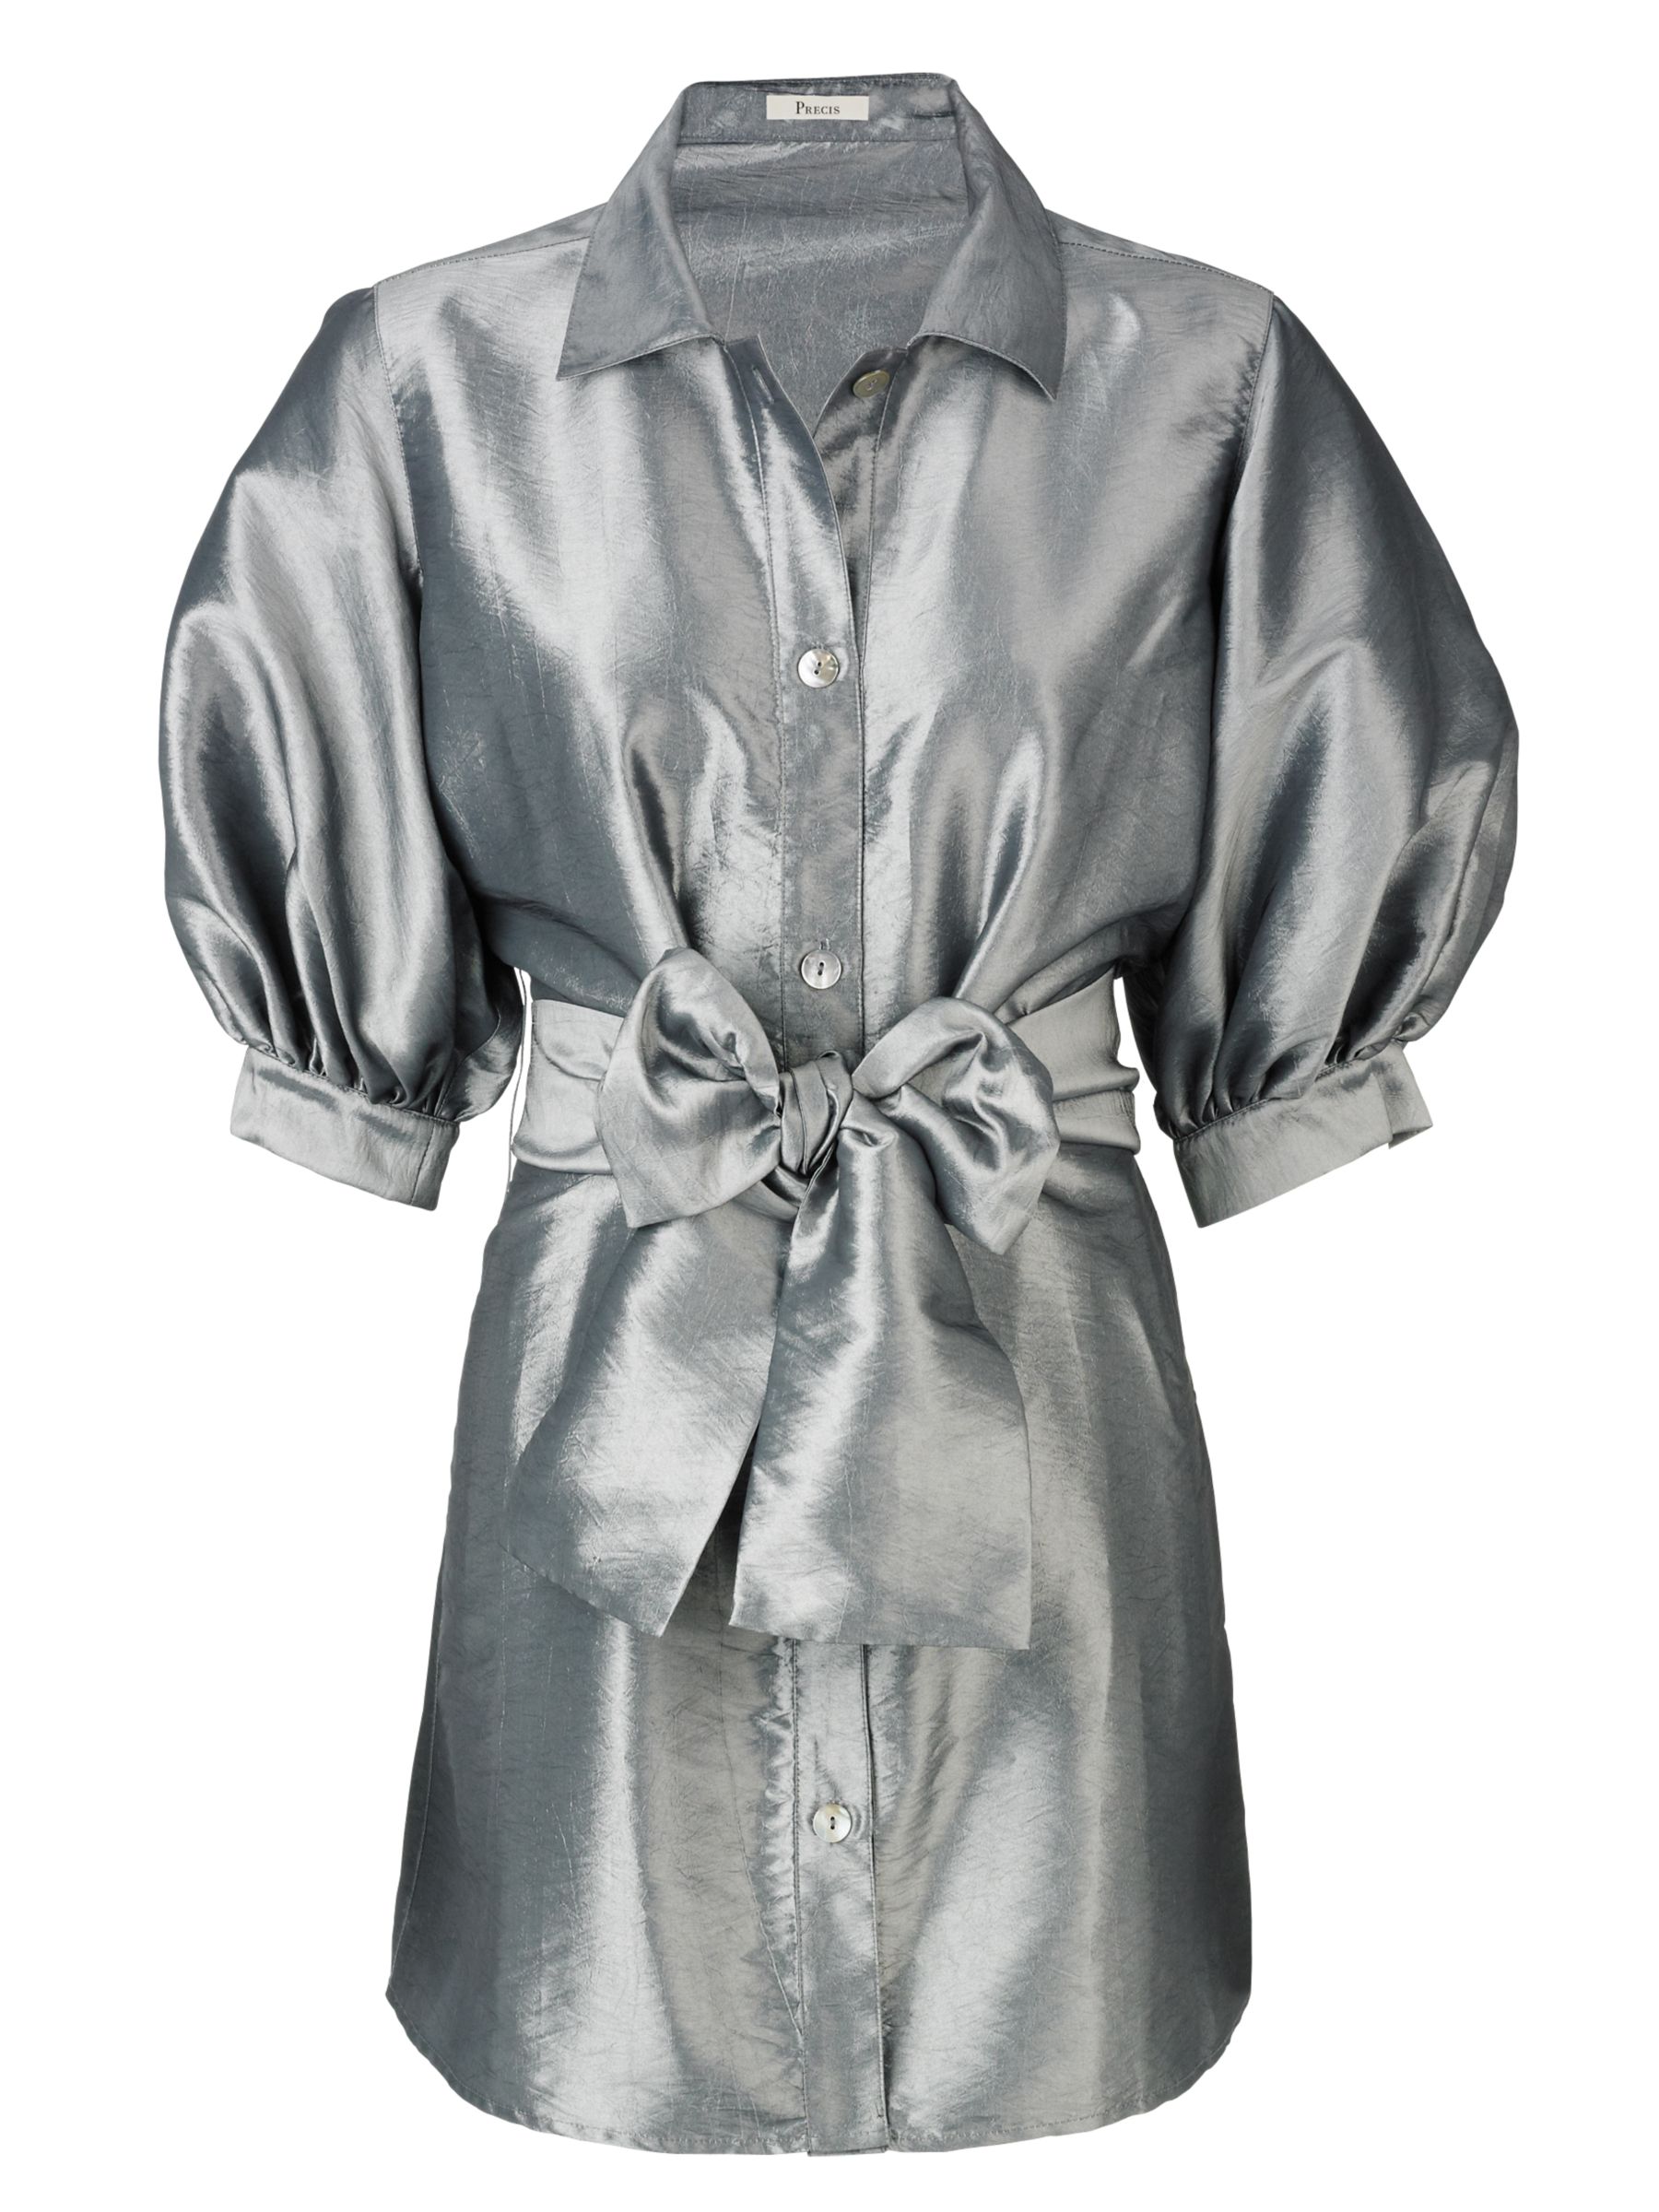 Precis Petite Belted Blouse, Silver